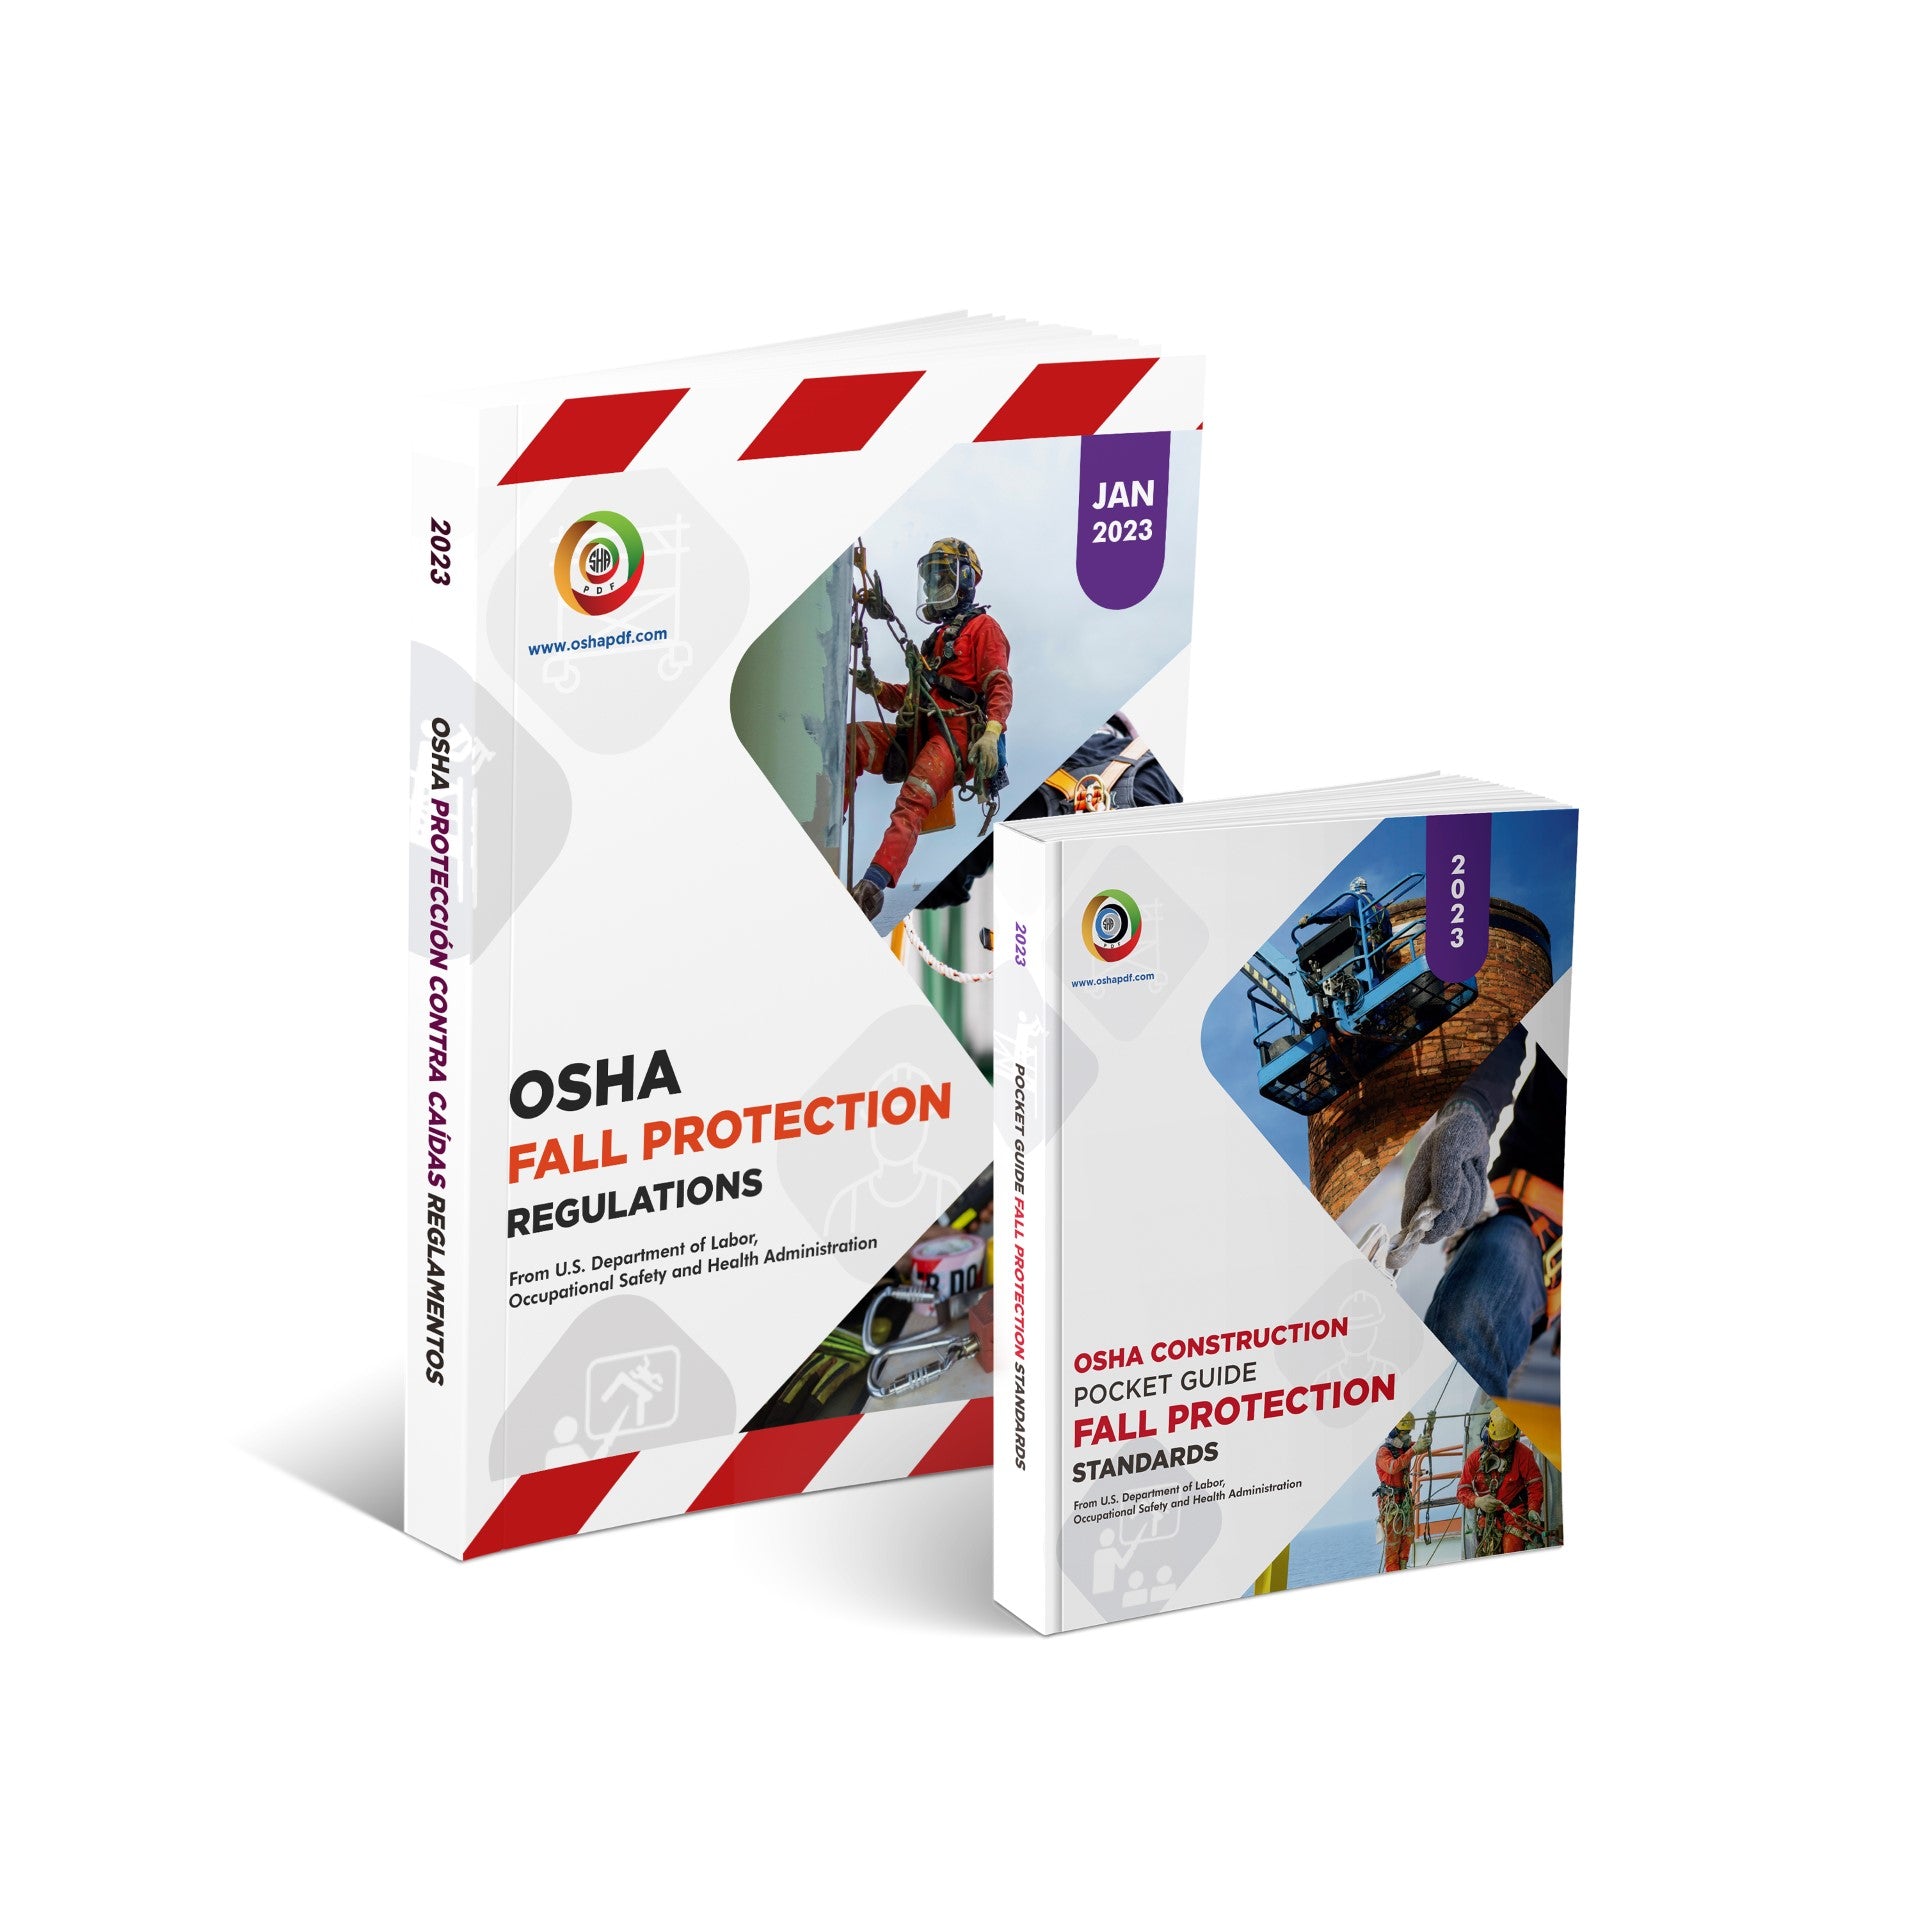 Fall Protection Regulations 2023 Book